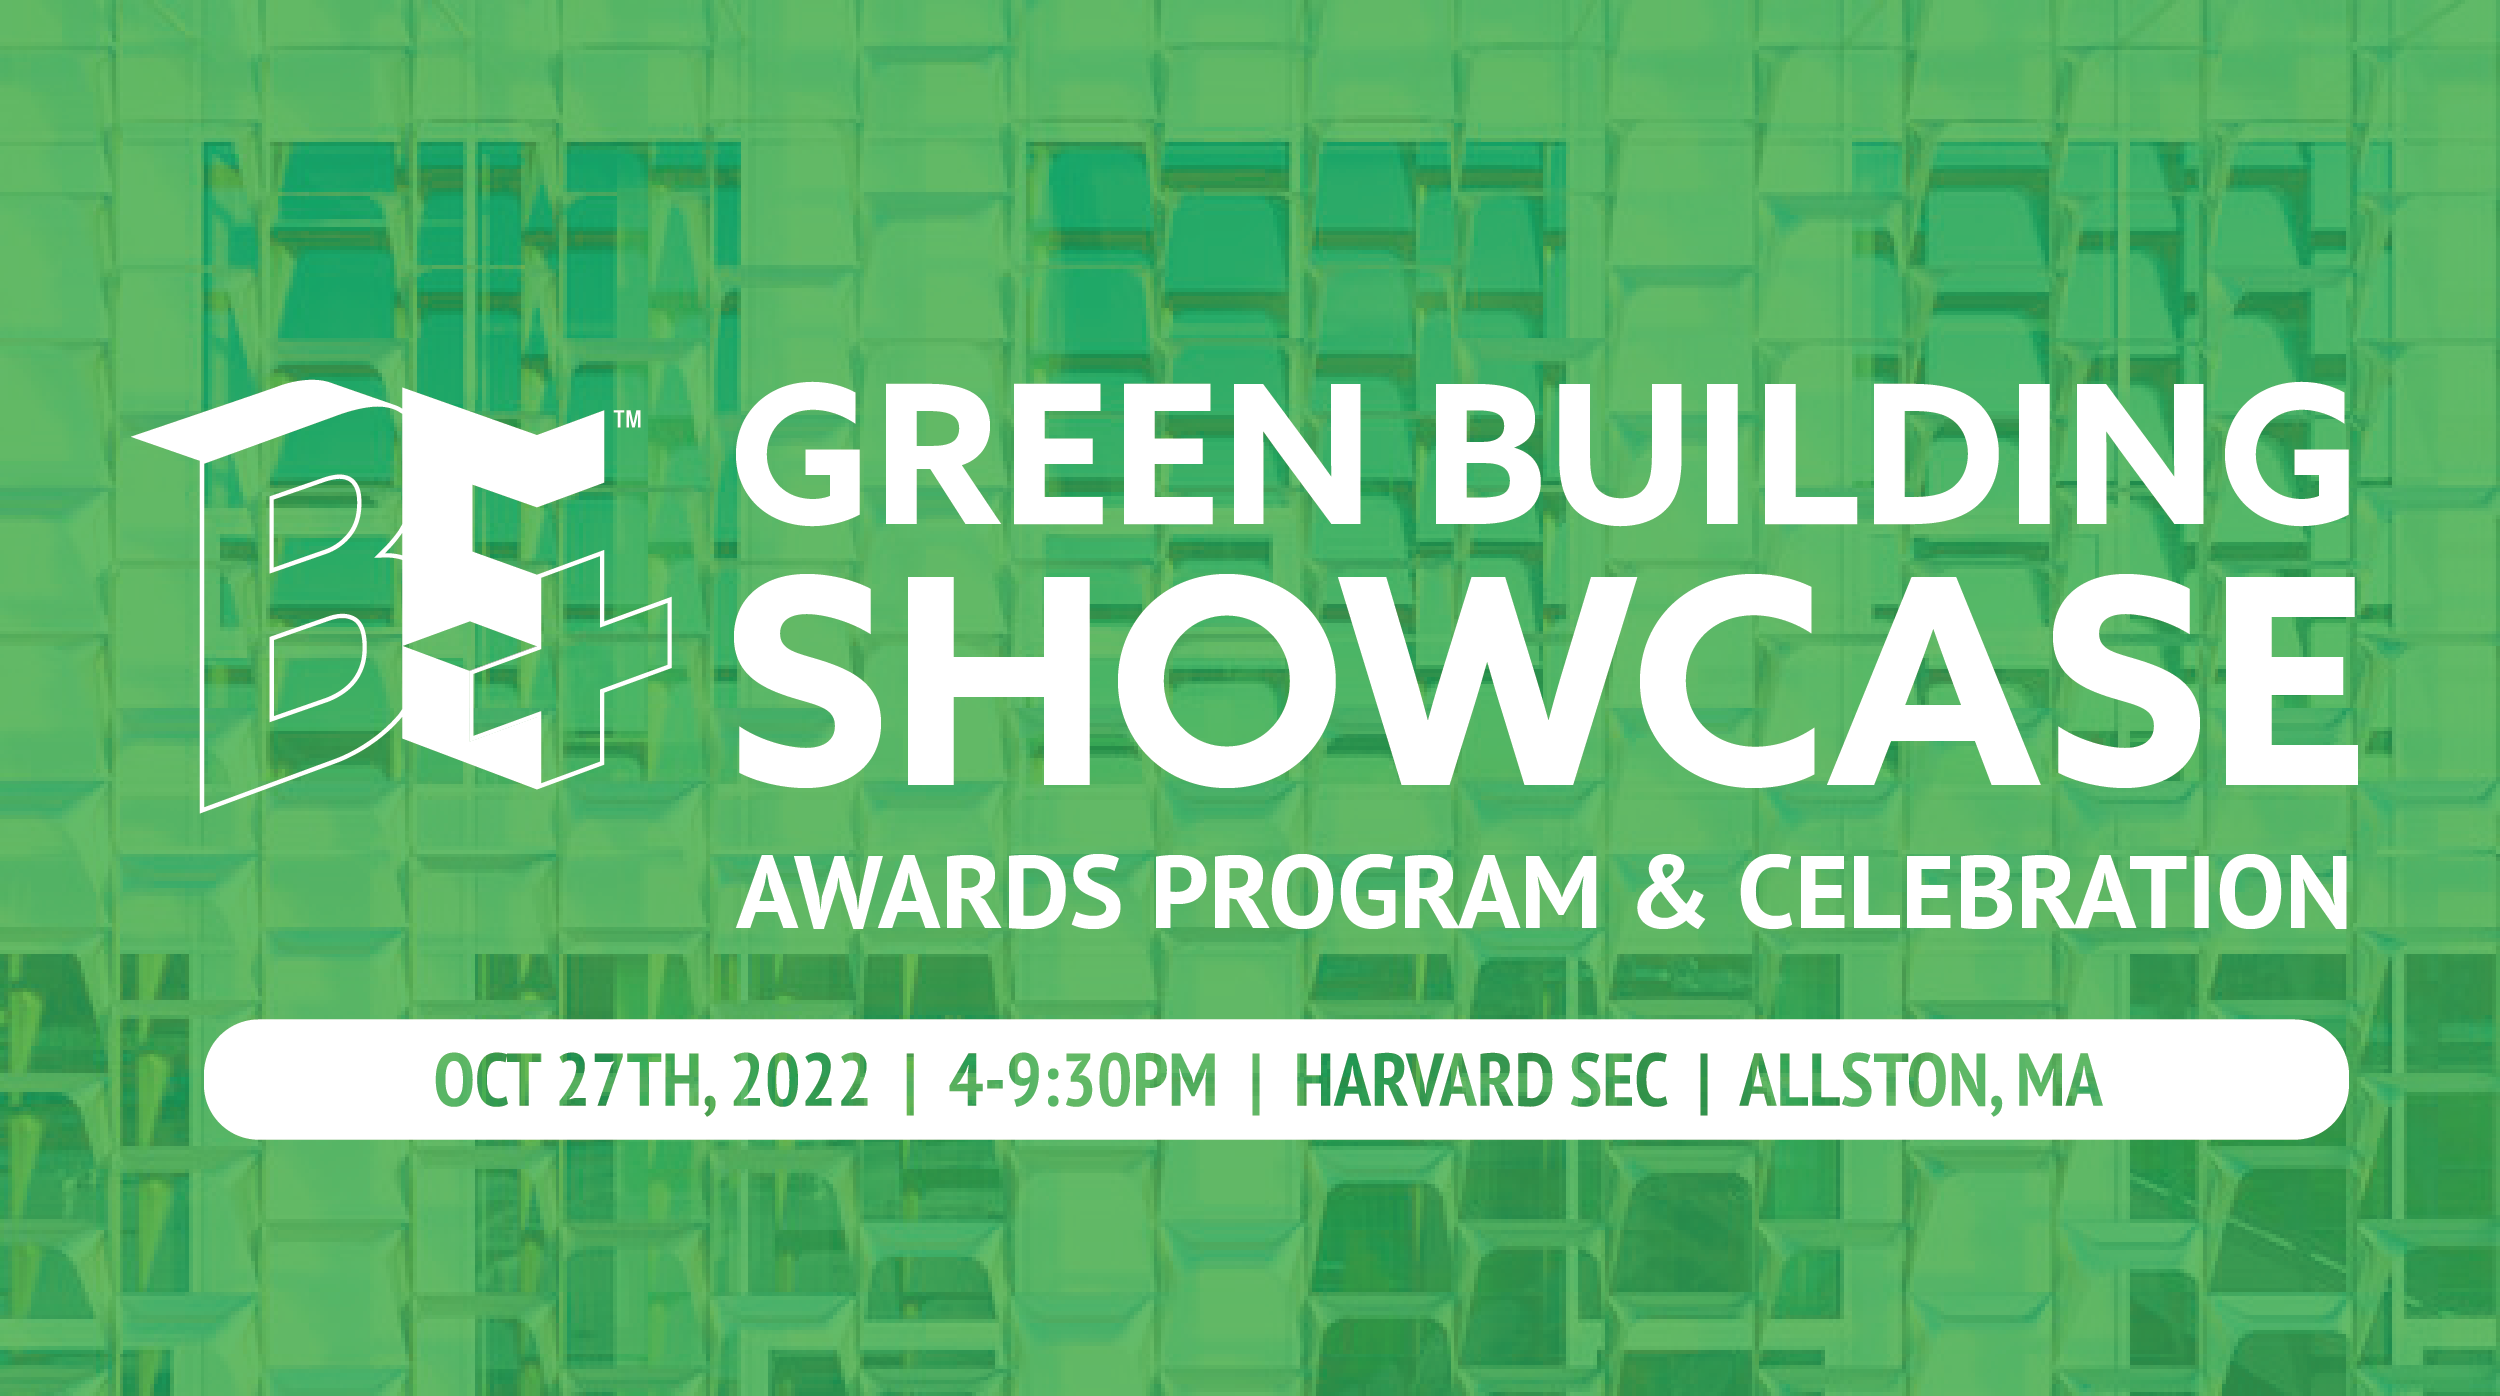 BE+ Green Building Showcase - Oct 27